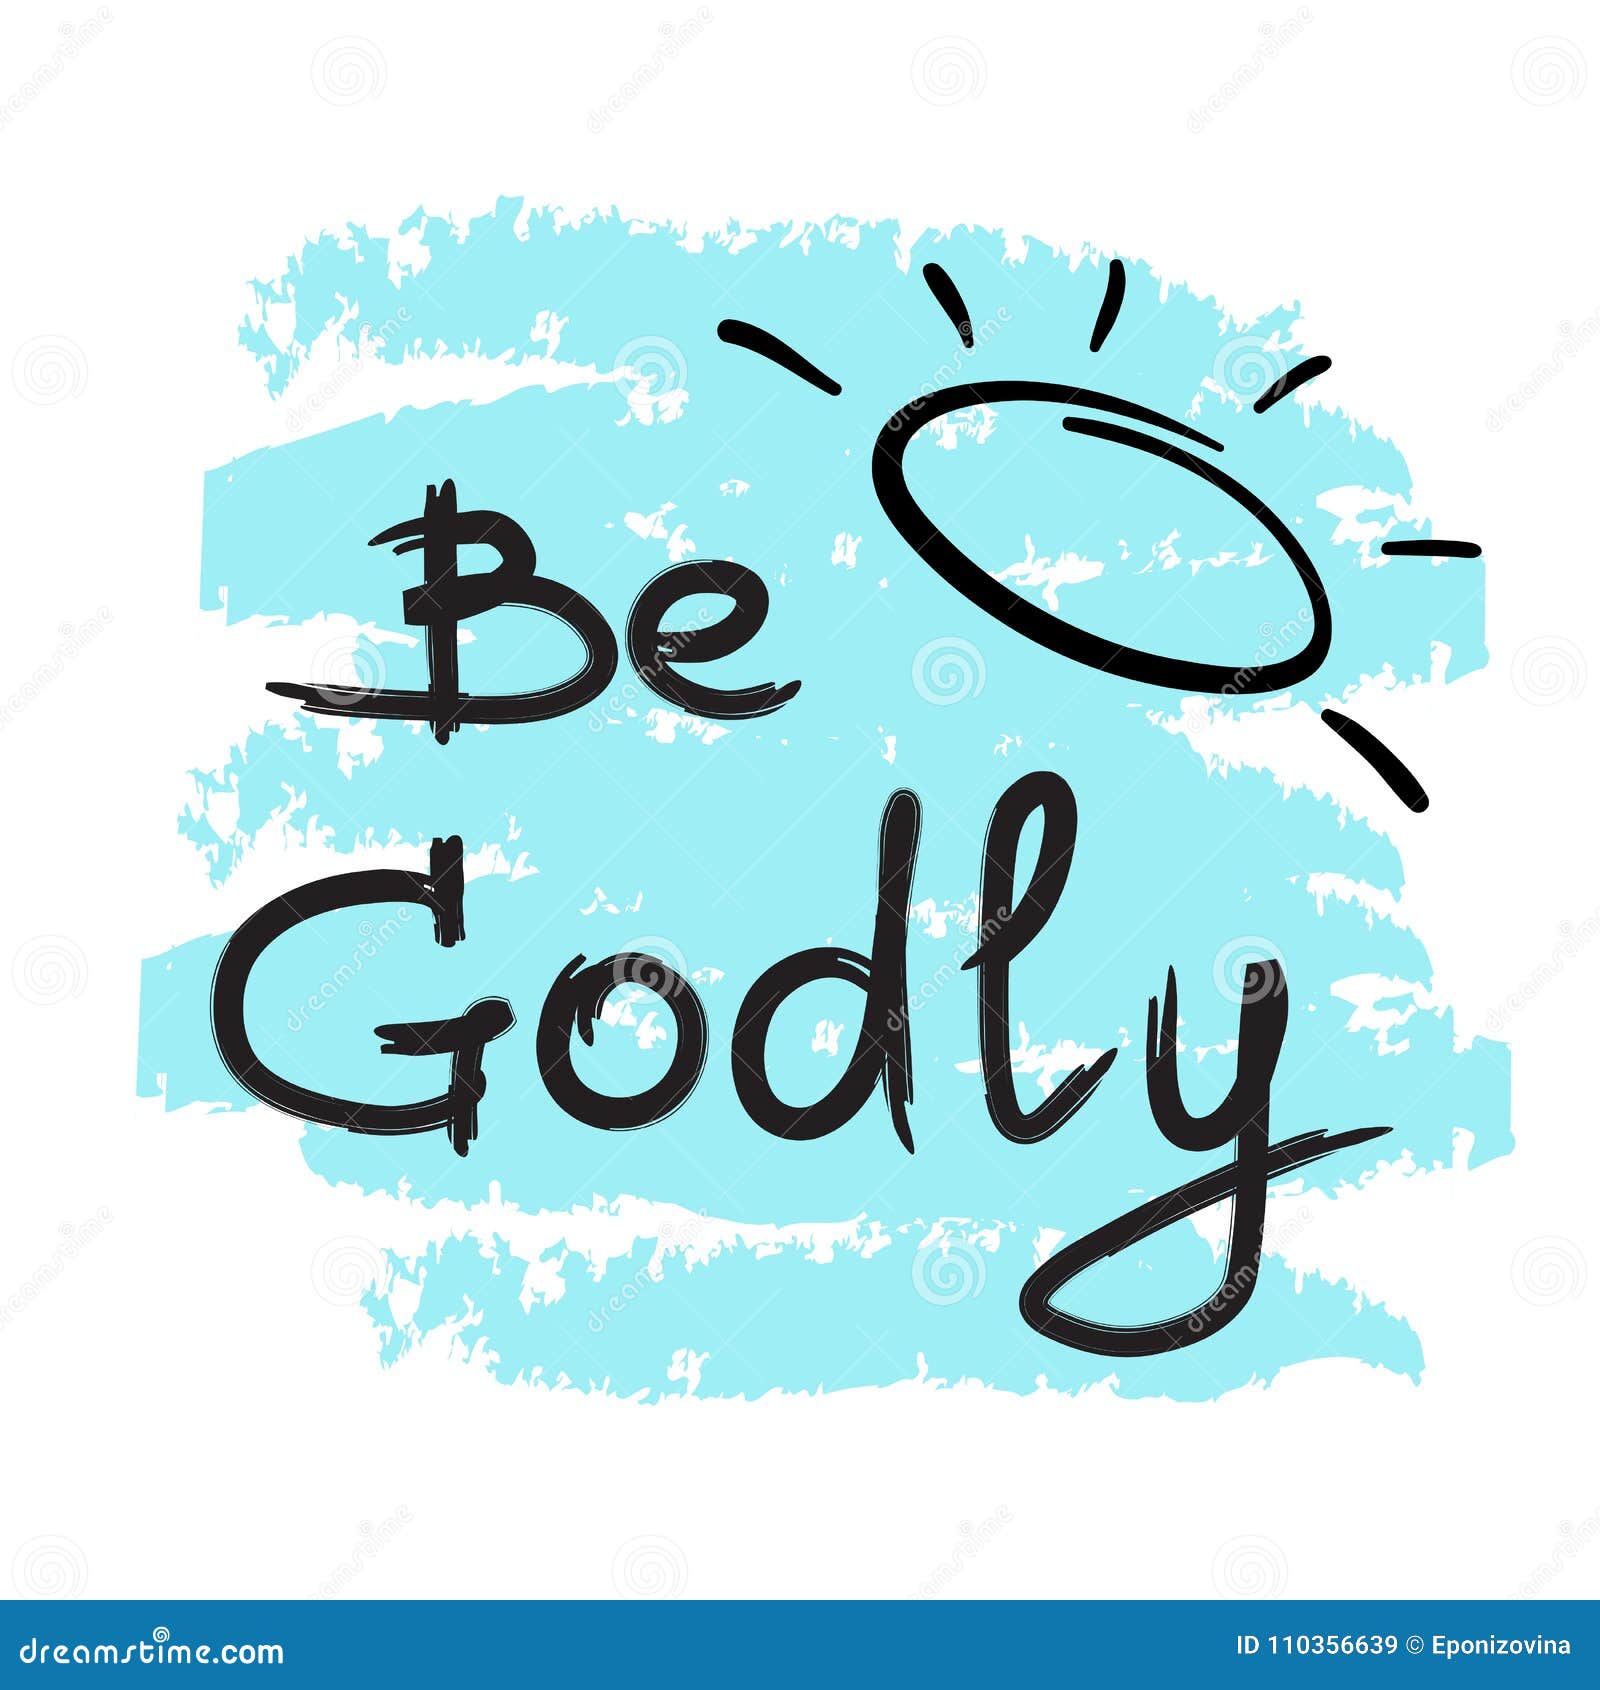 be godly - motivational quote lettering.